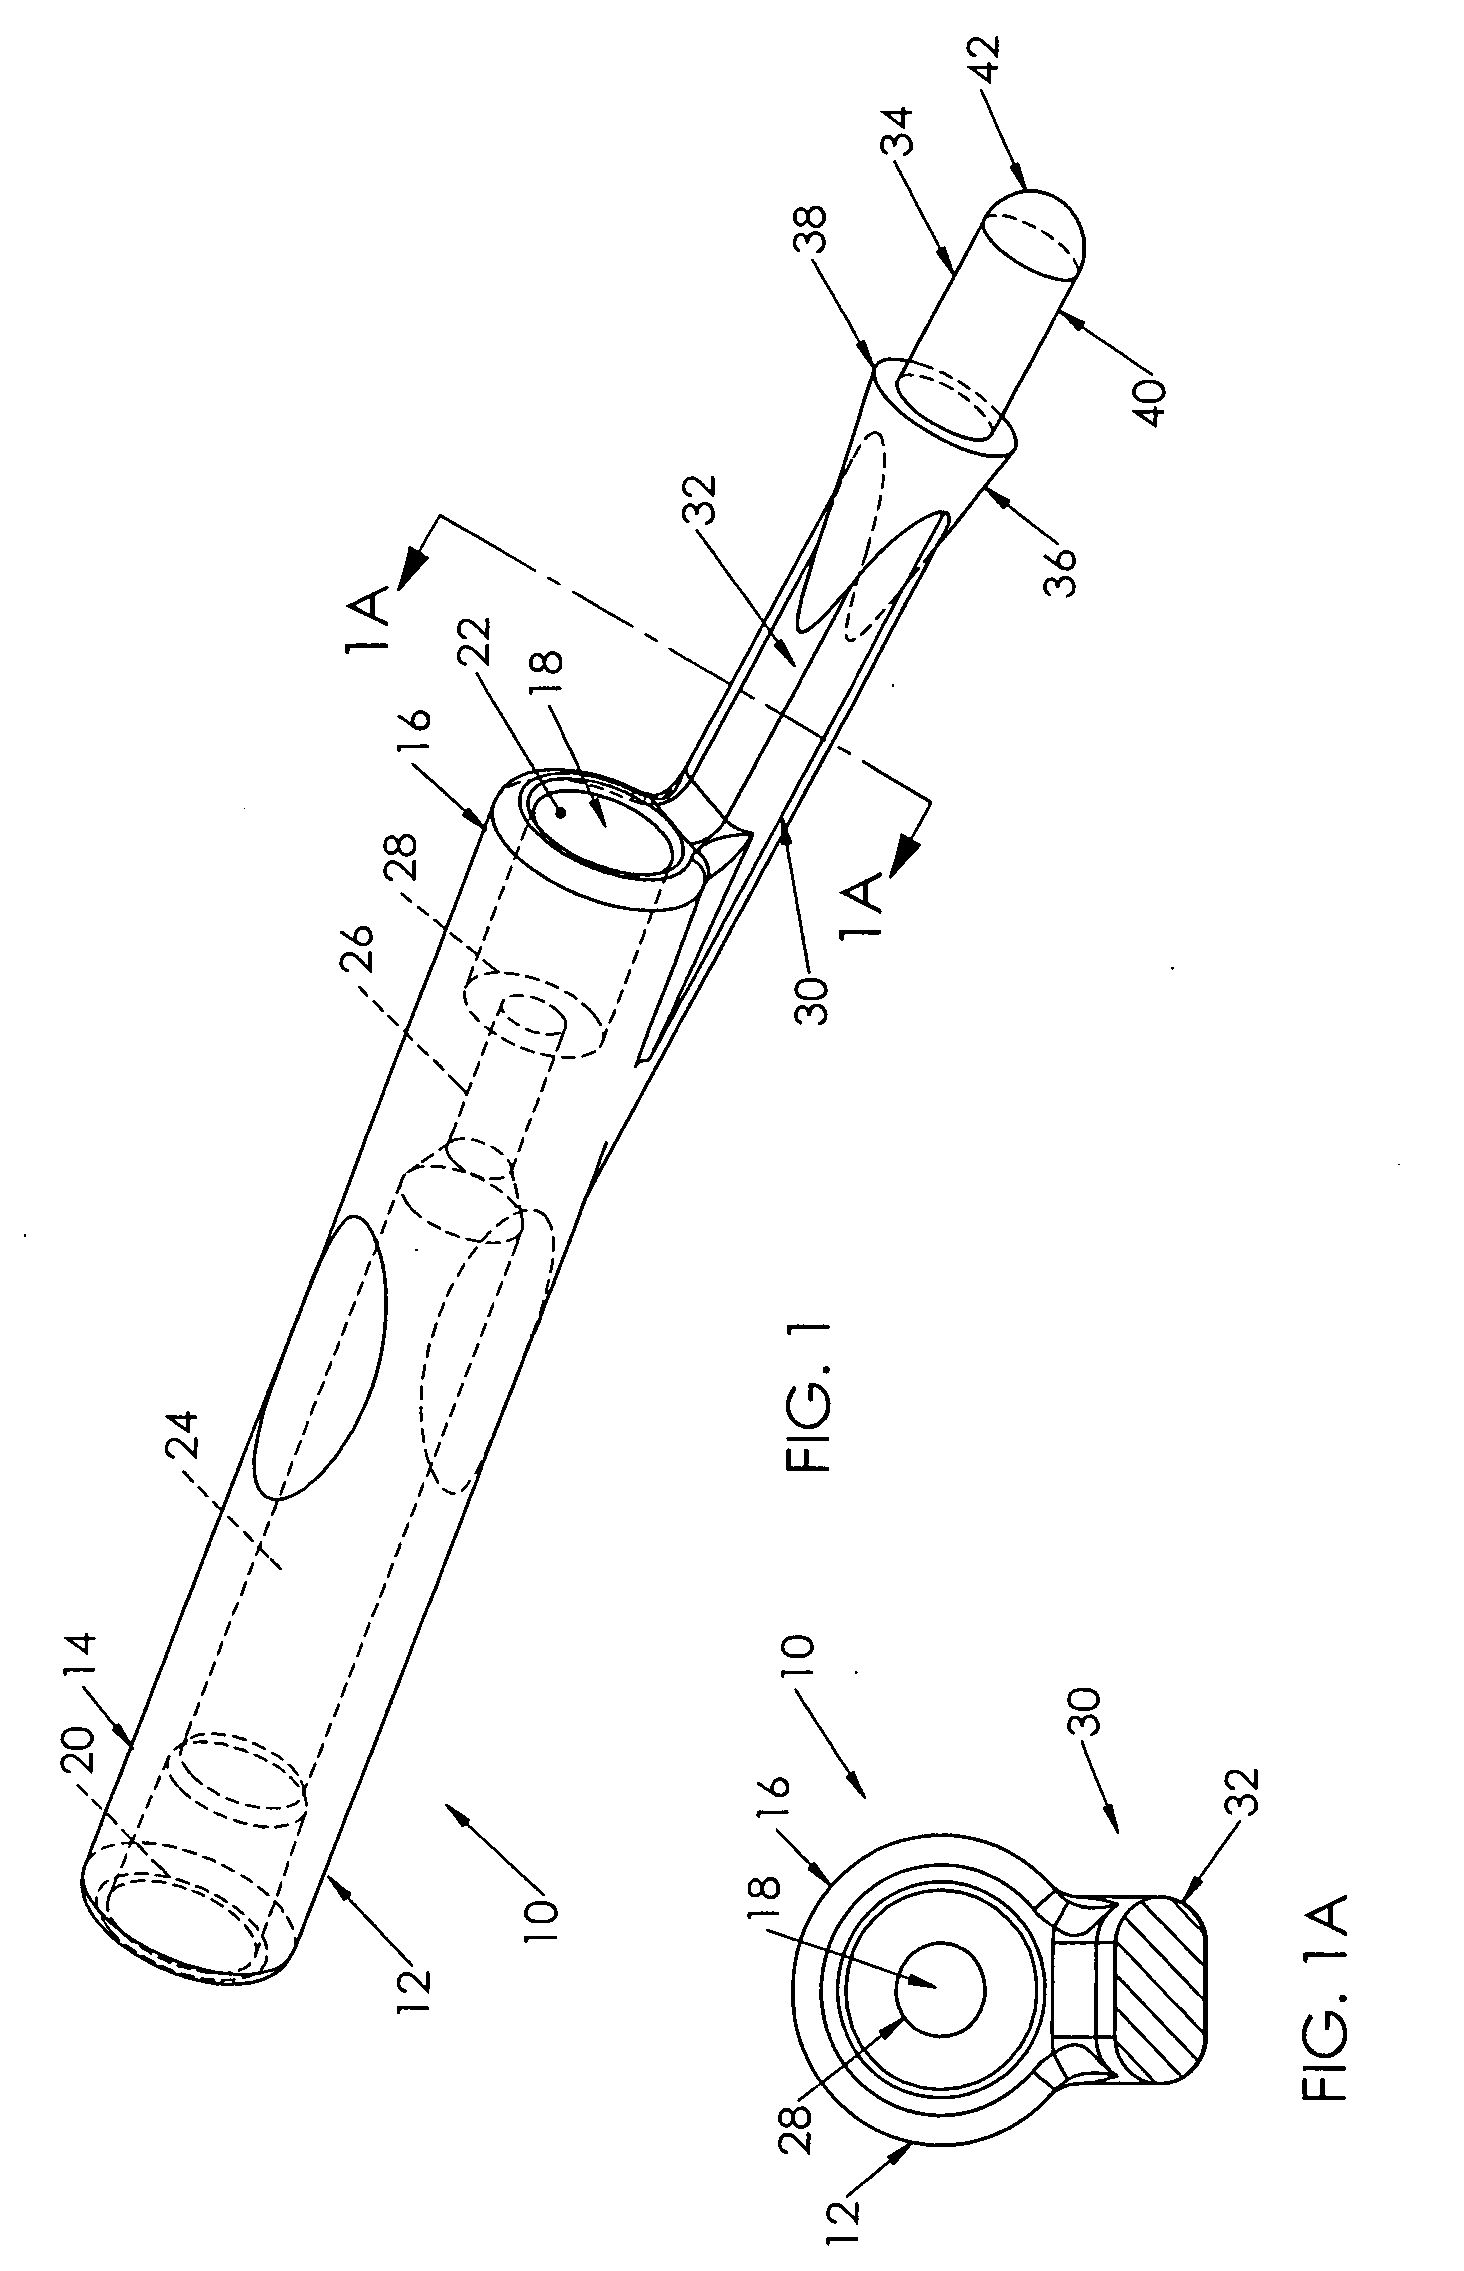 Catheter tunneler adapter and methods of assembly to a catheter and use